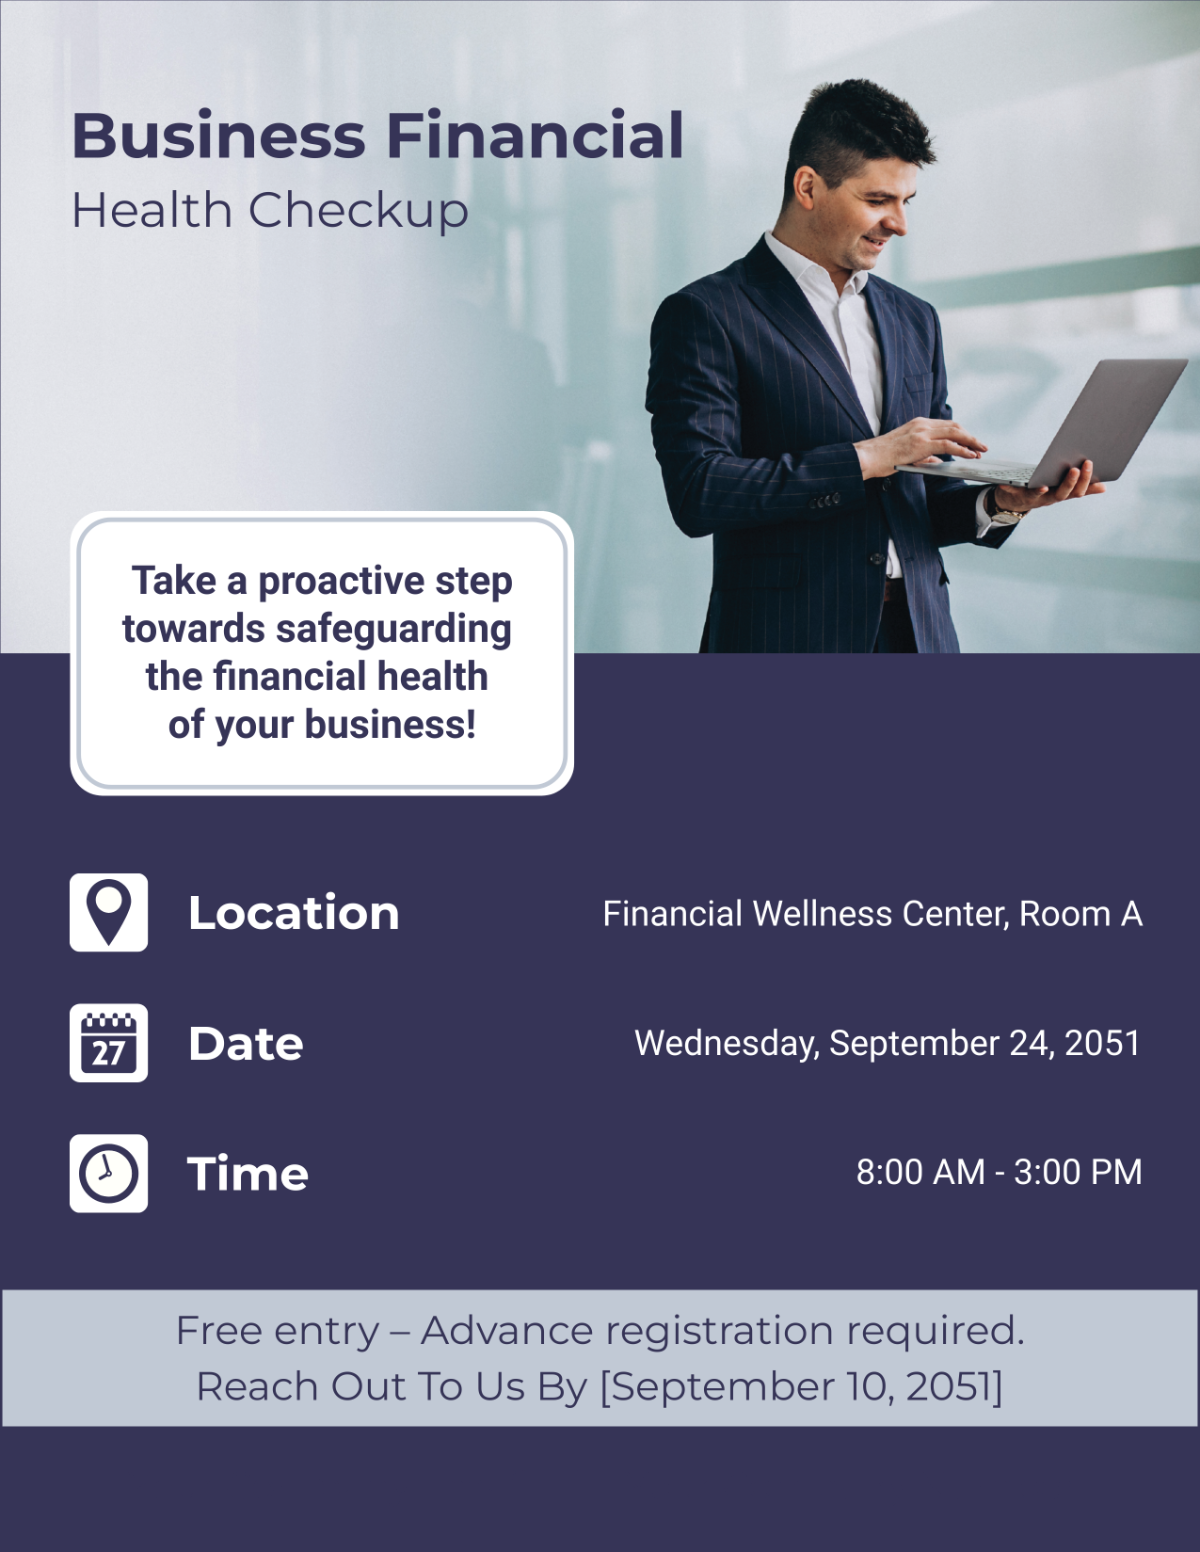 Business Financial Health Checkup Flyer Template